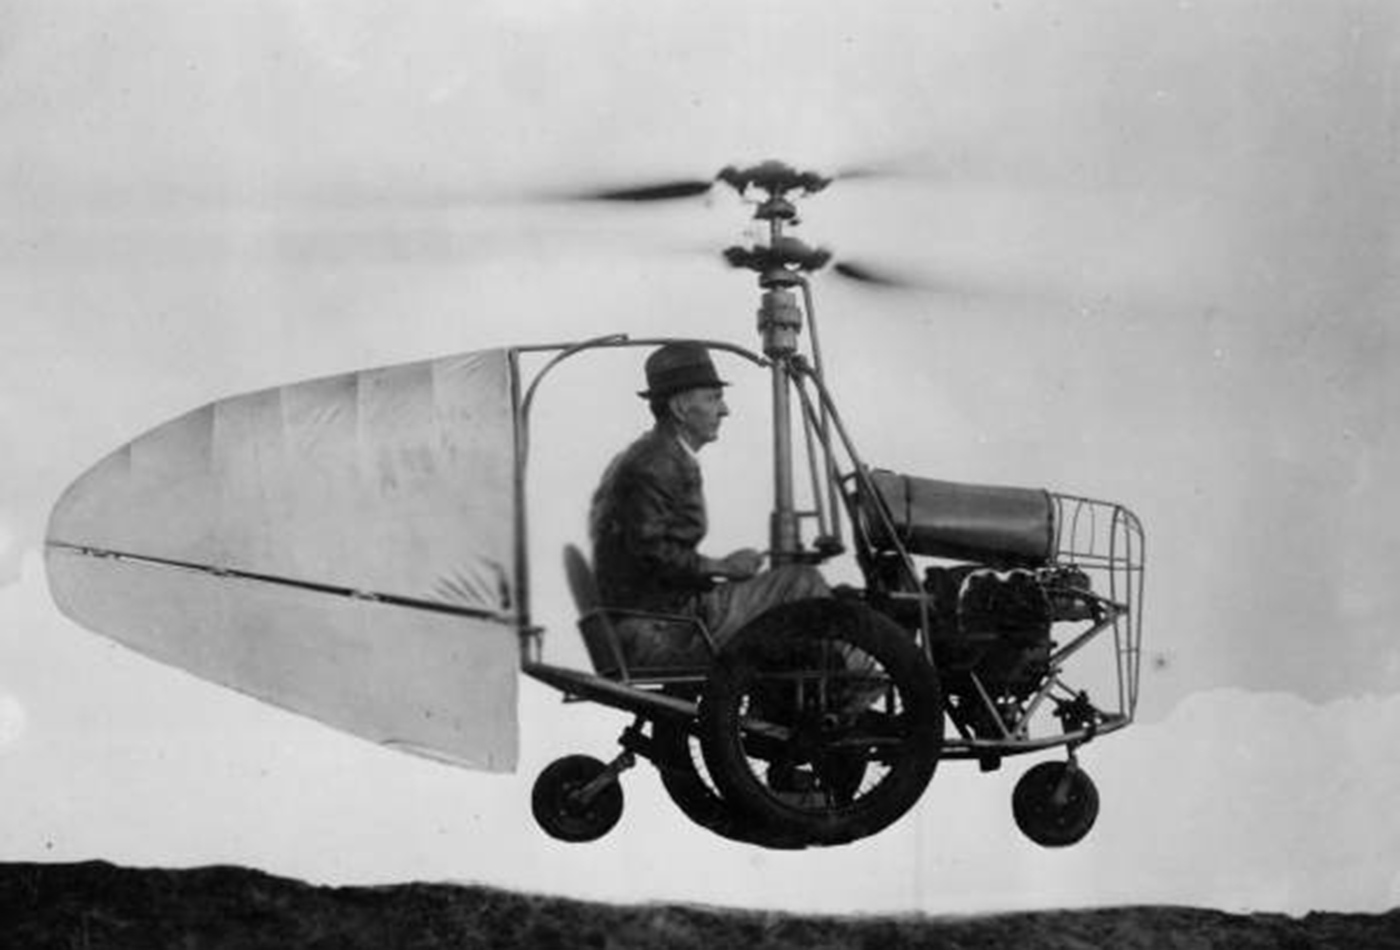 Built by Jess Dixon of Andalusia, Alabama. Can fly forward, backward, straight up, or hover in the air. Circa 1940.